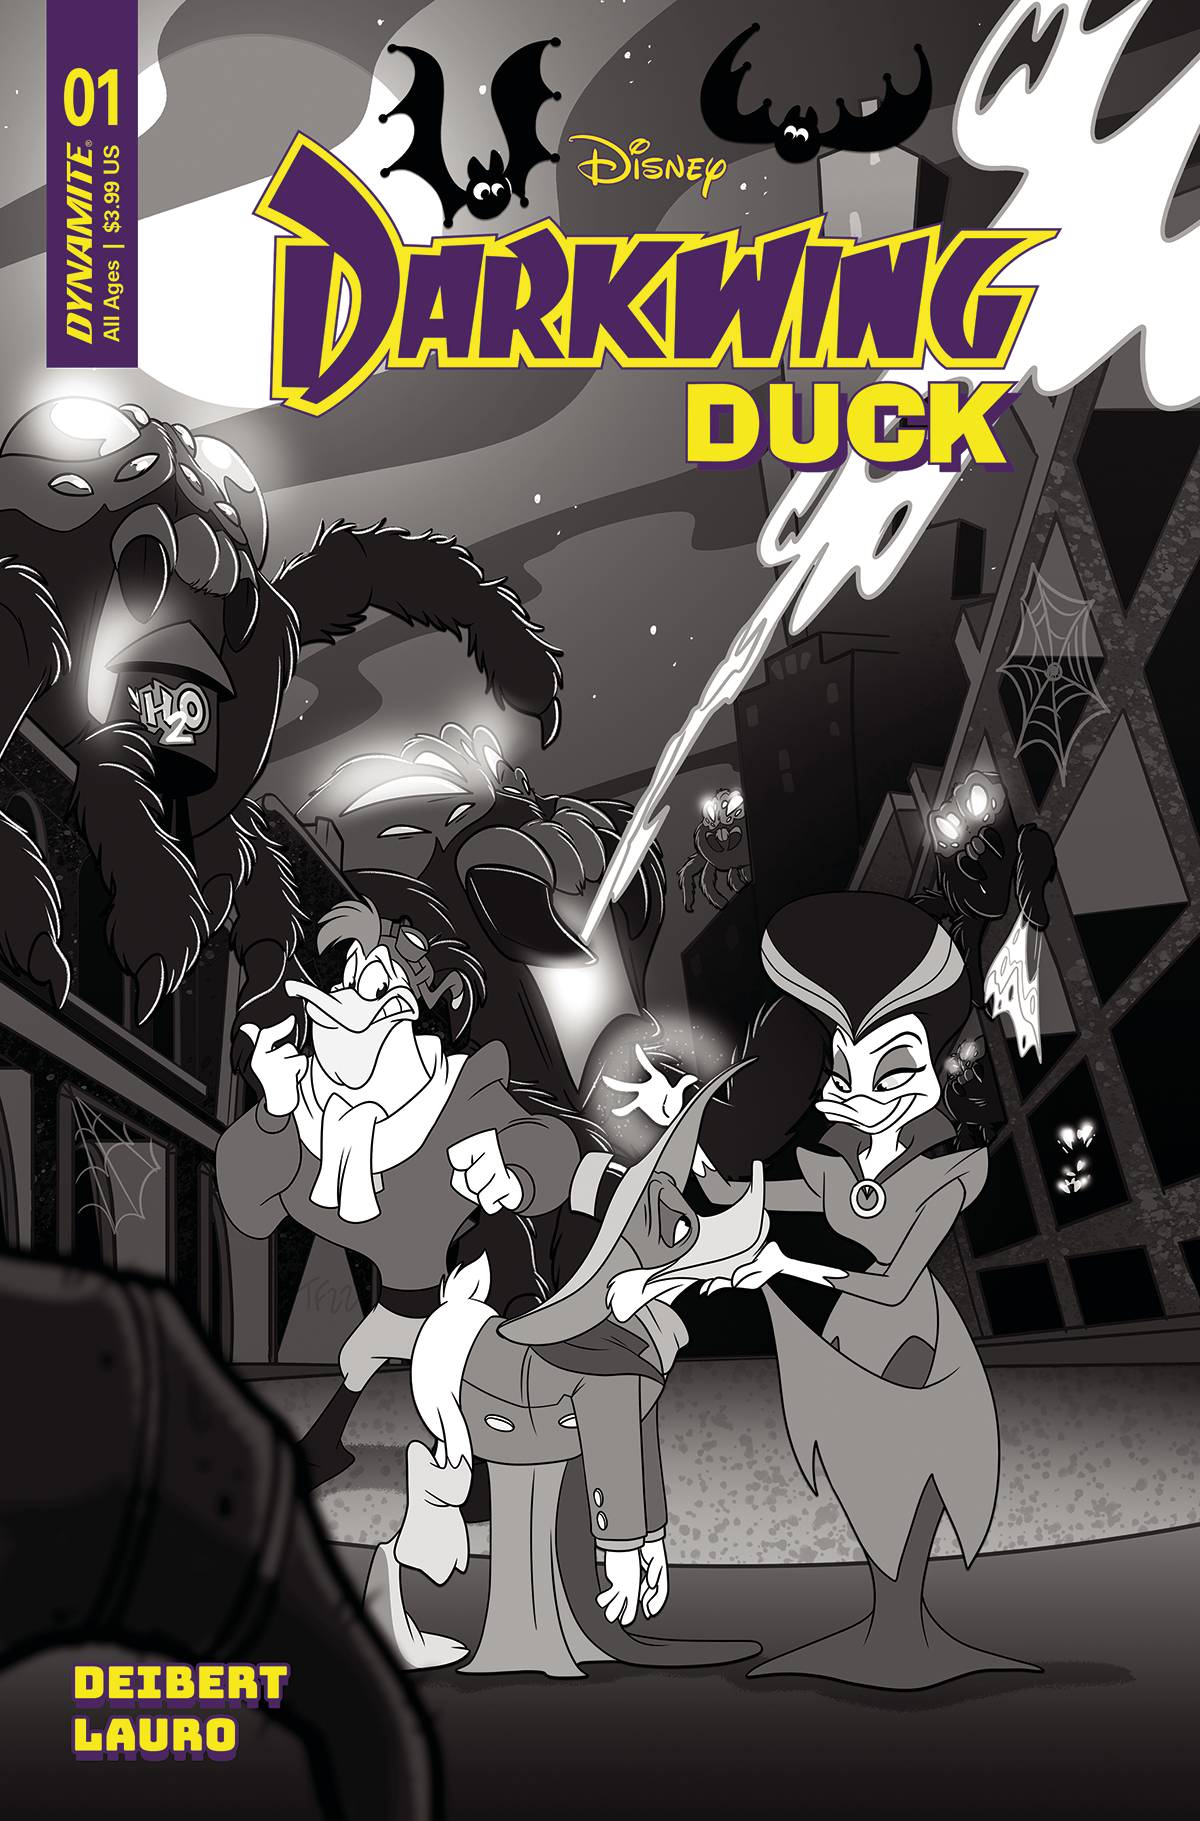 Darkwing Duck #1 Cover ZI 10 Copy Last Call Incentive Forstner Black & White 